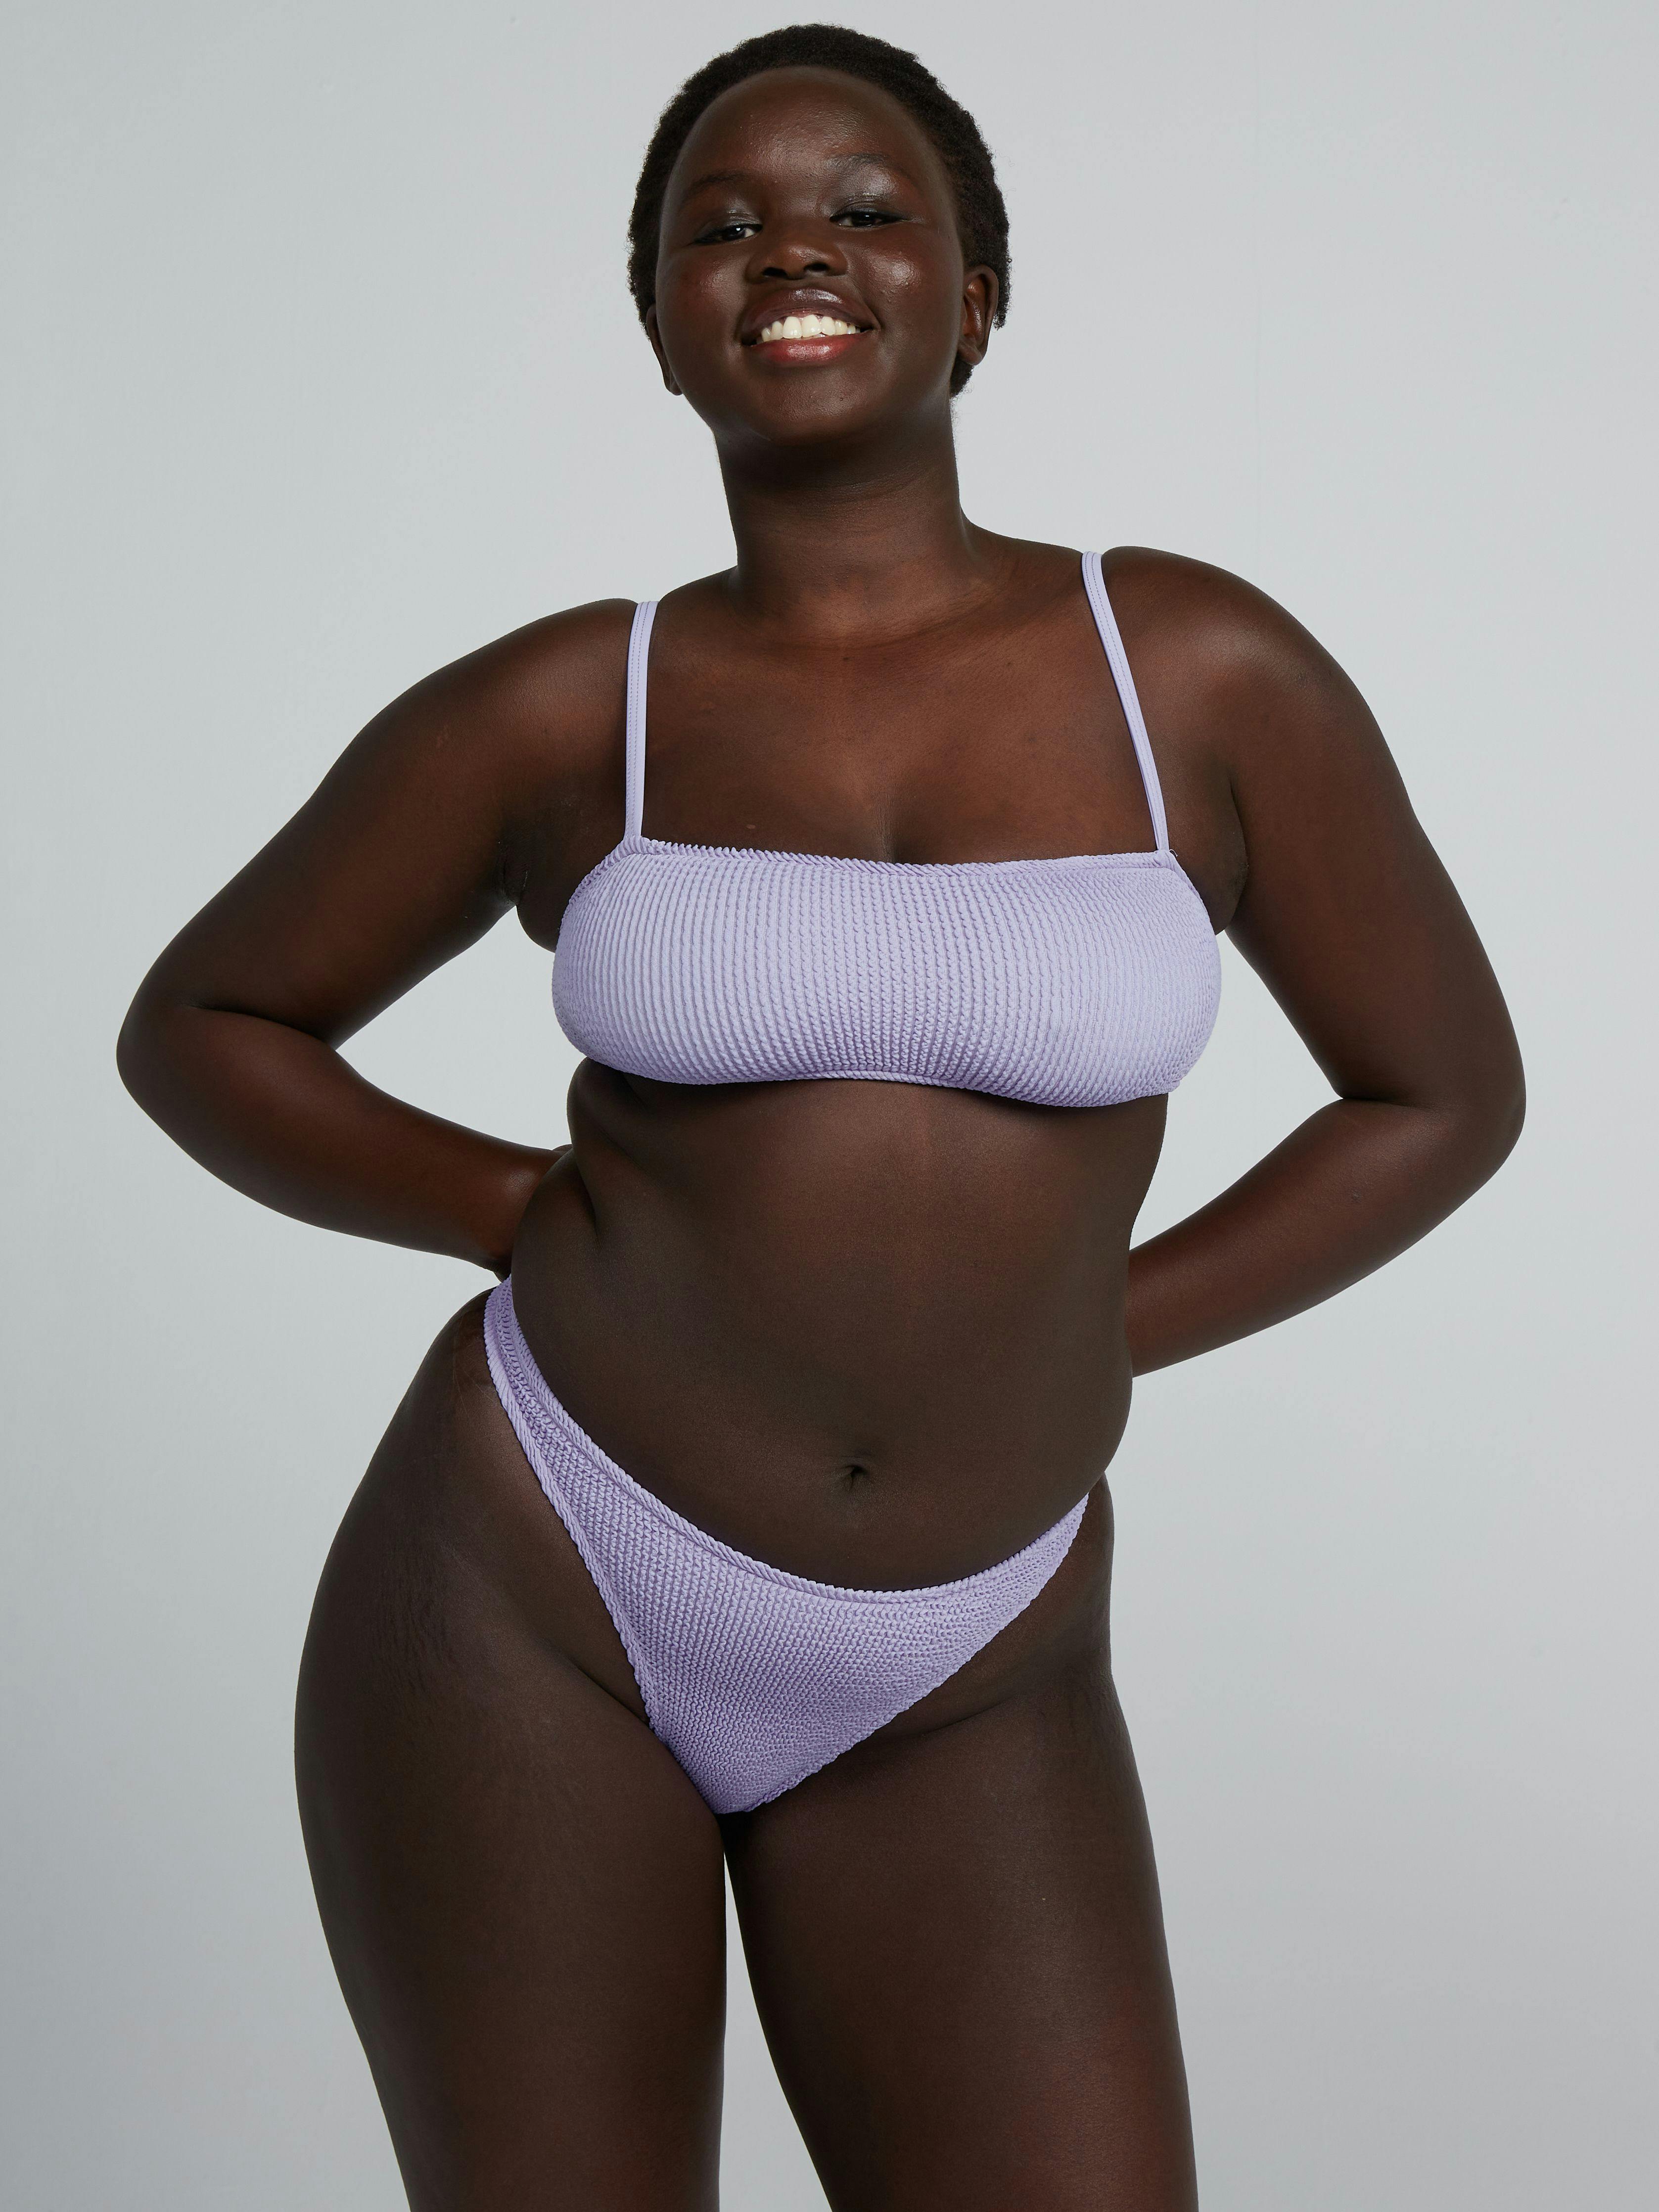 A model wearing Poise Cheeky Two-Piece